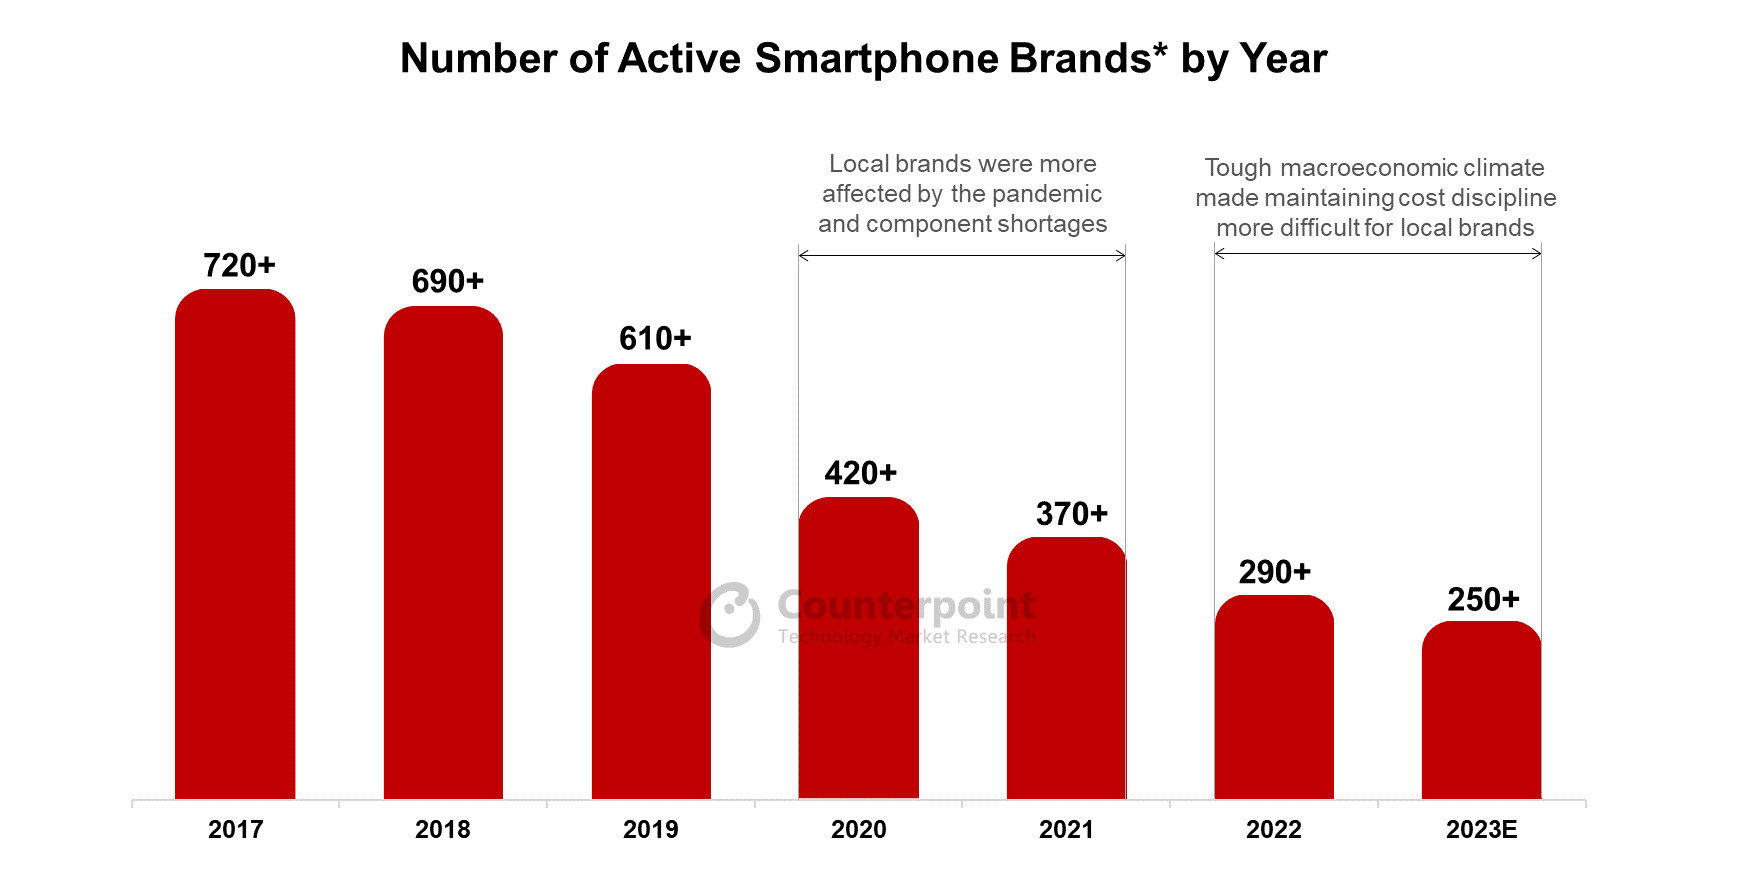 Active smartphone brands Counterpoint Research